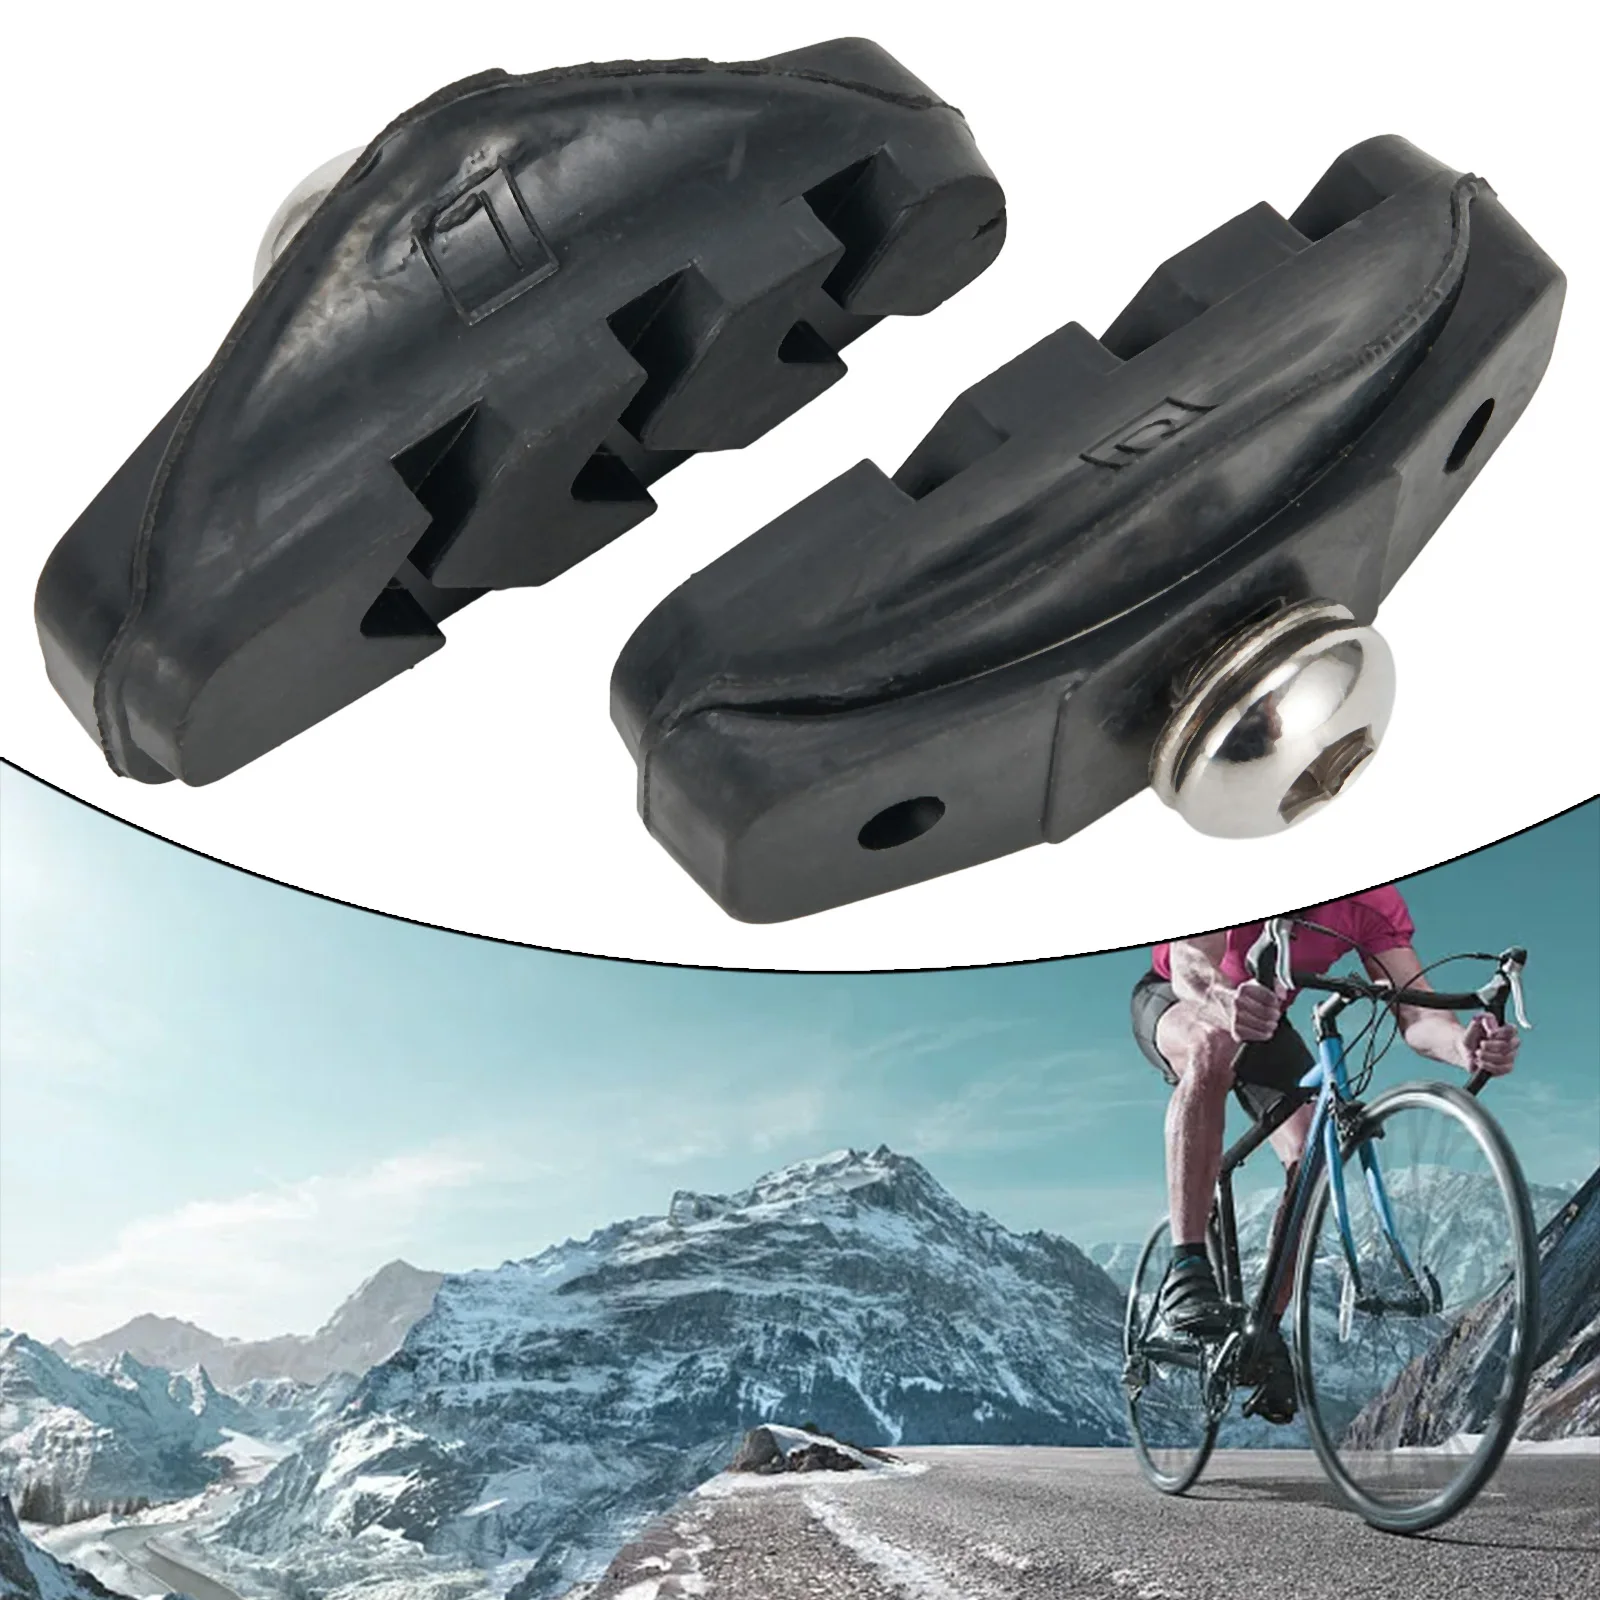 

Bike C Brake Pads Parts Cycling Mountain Bike Silent Soft Rubber 1 Pair C Brake Pad C Clip Clamp Cycle Durable